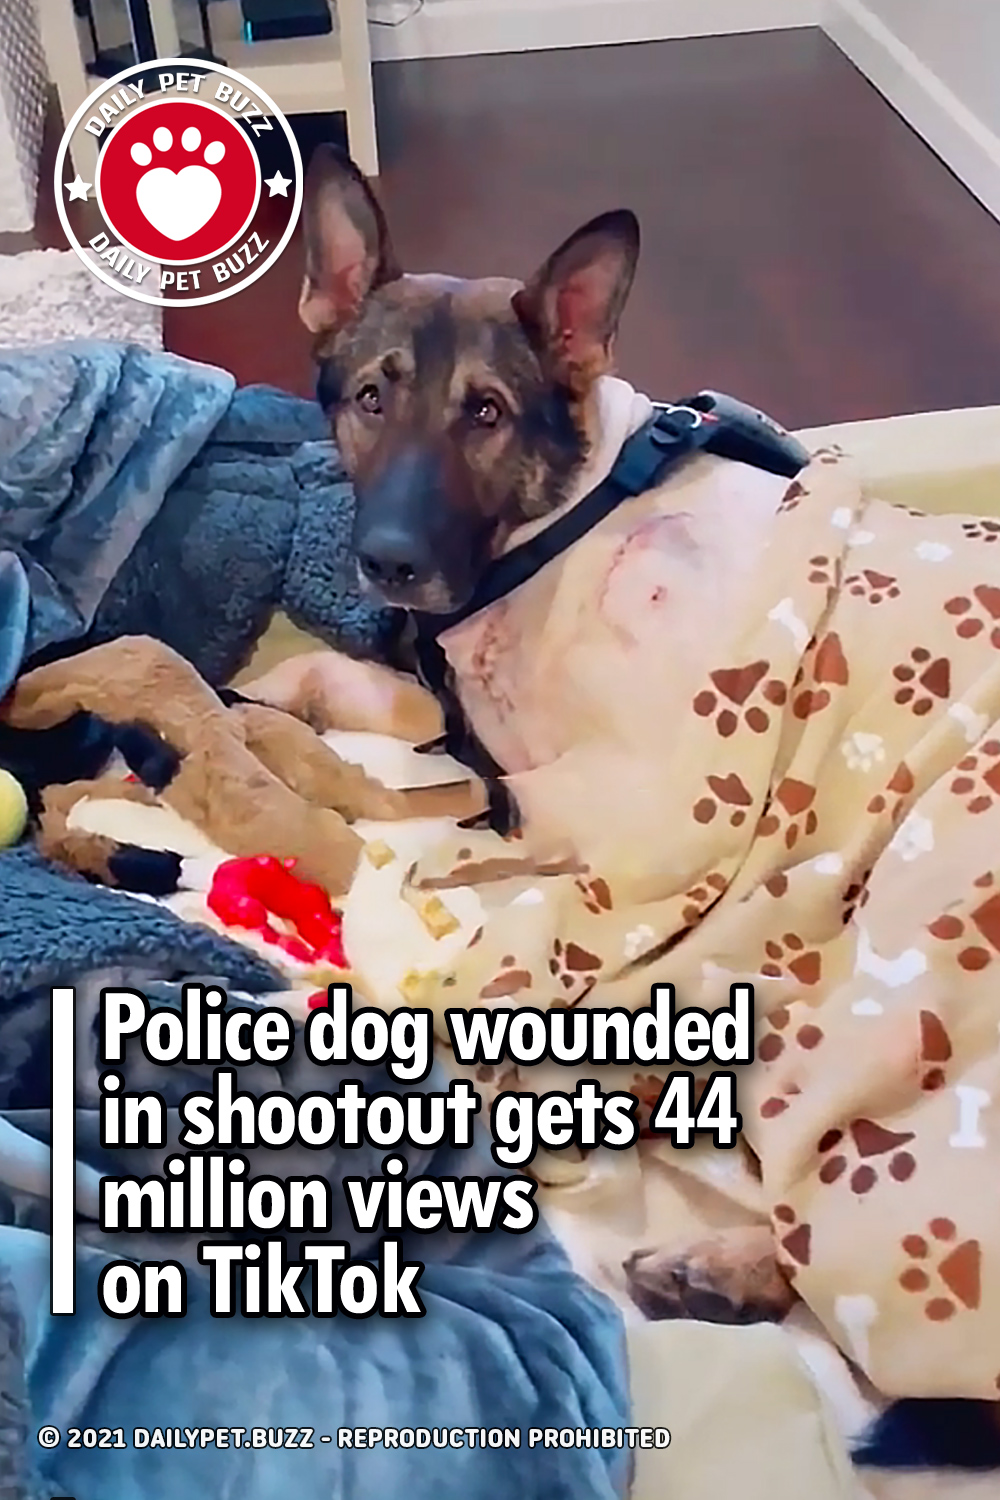 Police dog wounded in shootout gets 44 million views on TikTok